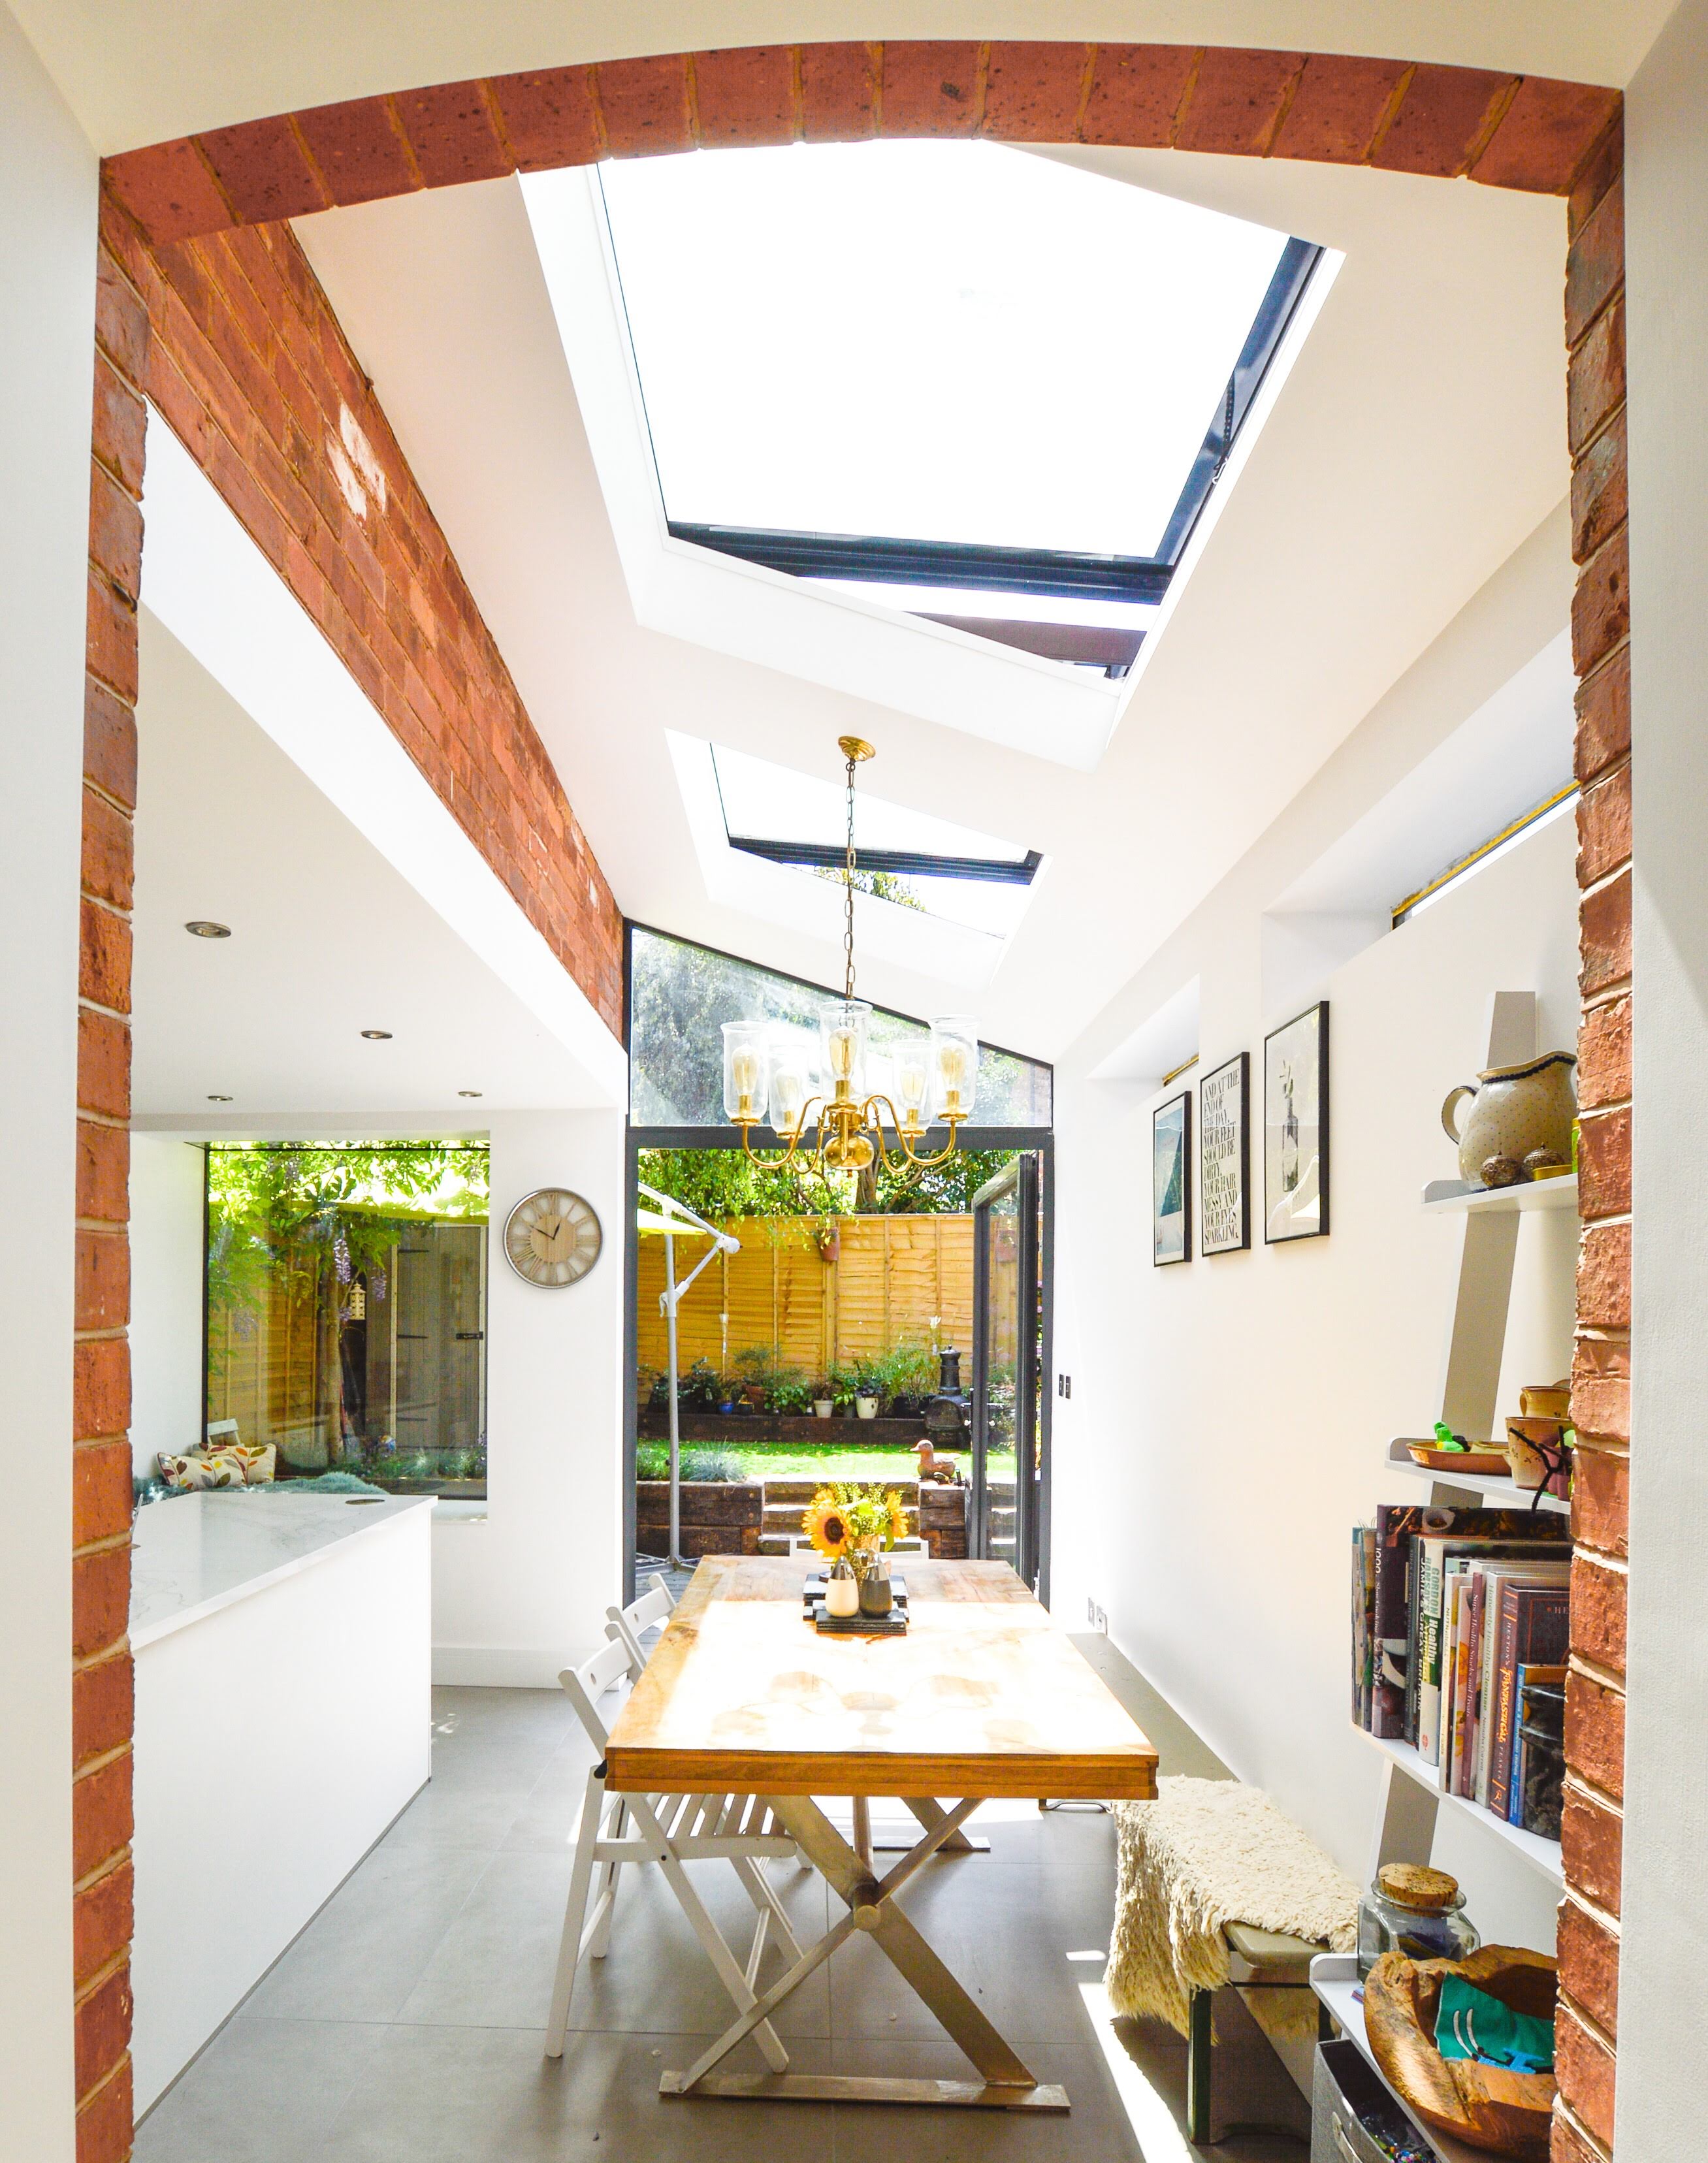 Small kitchen and dining area with exposed brick walls and two opening pitched rooflights.